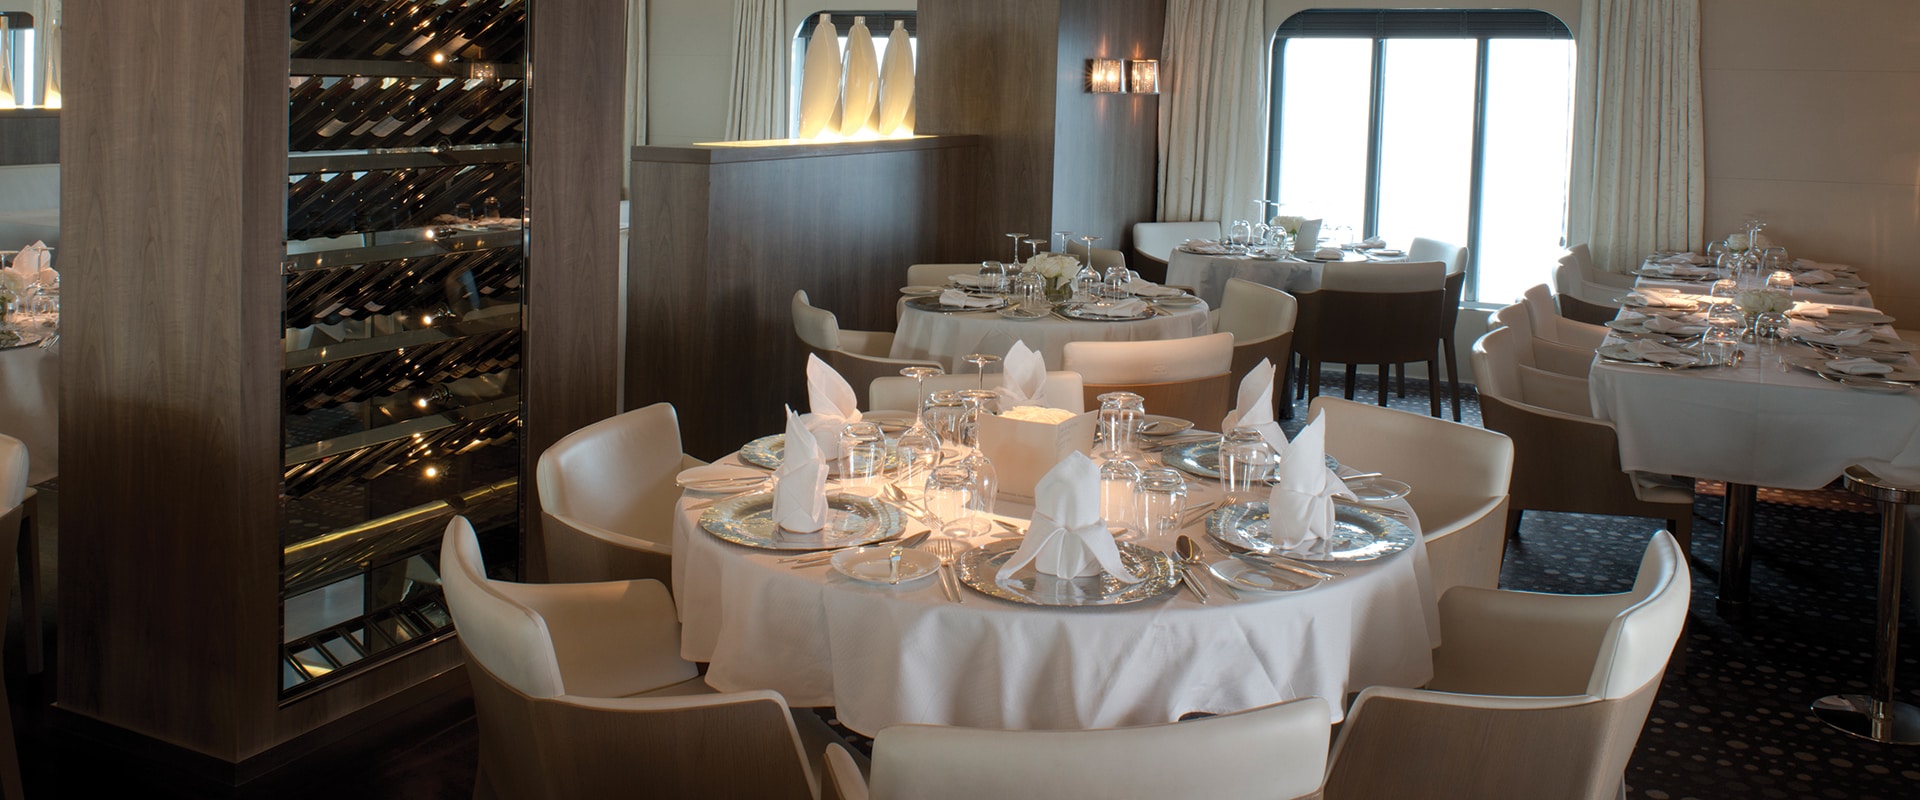 Fine dining restaurant onboard a ship